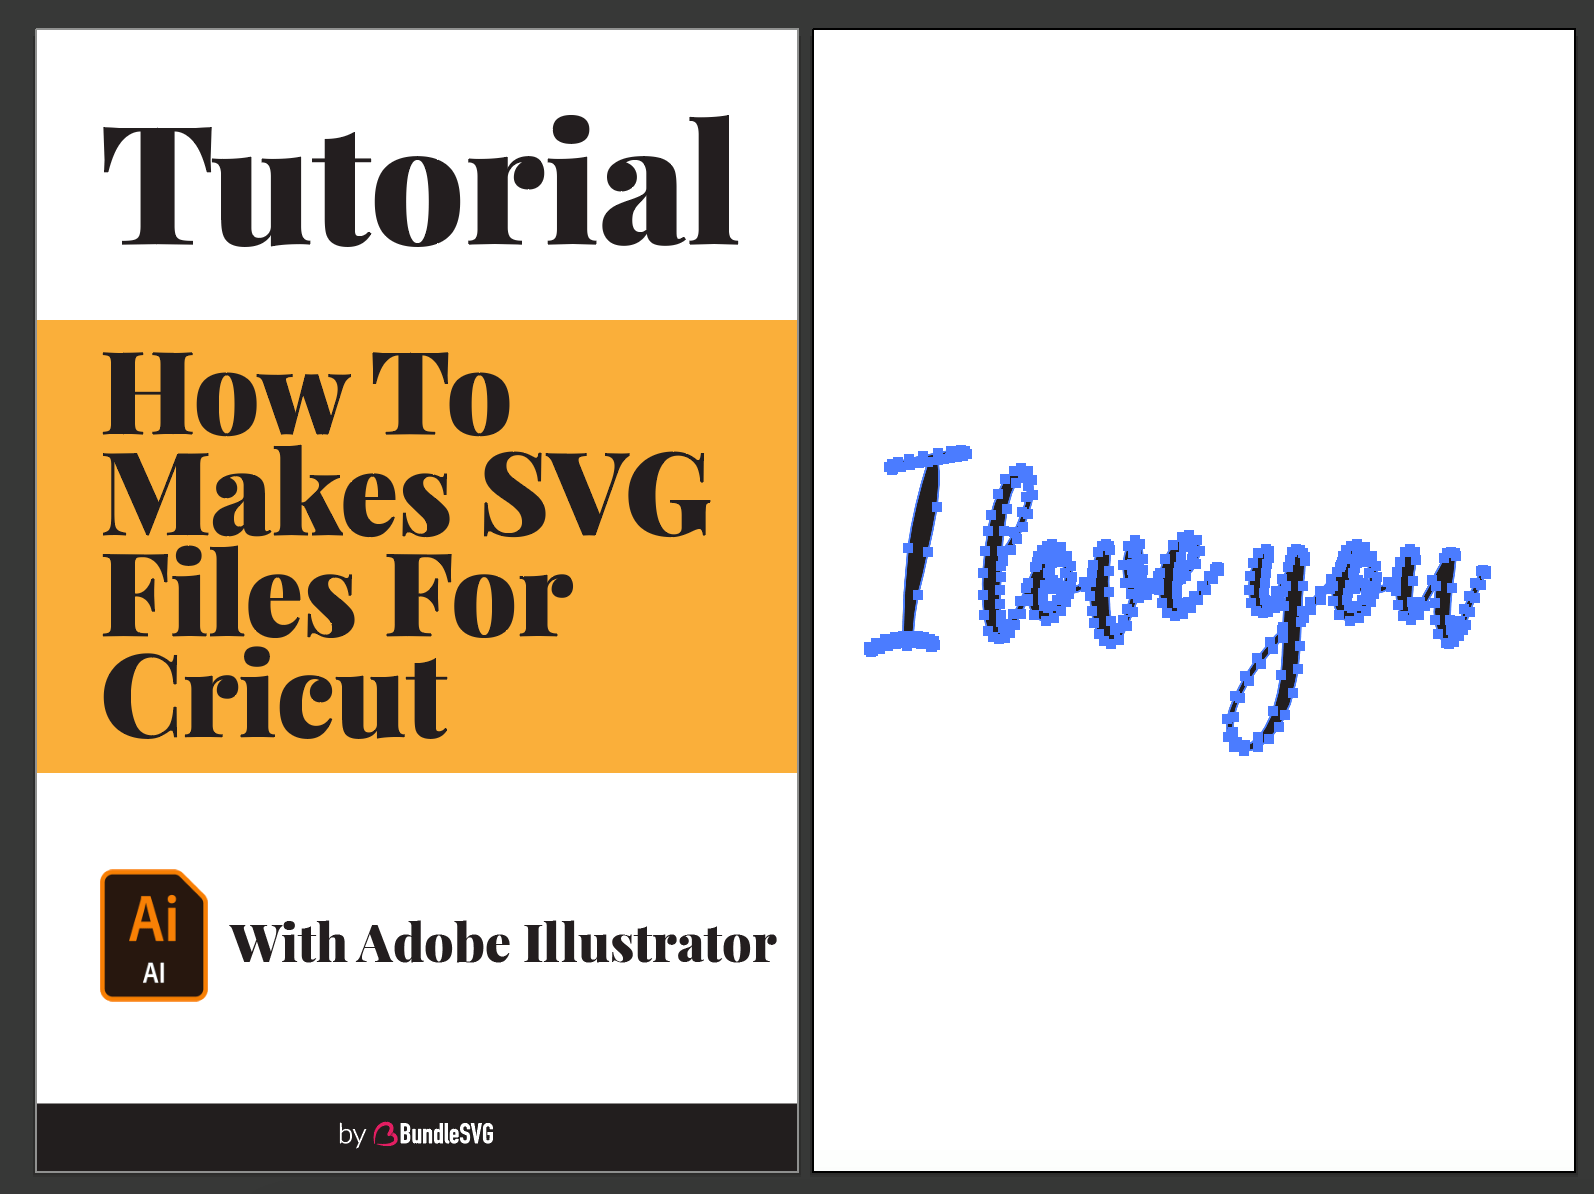 How To Make SVG Files For Cricut